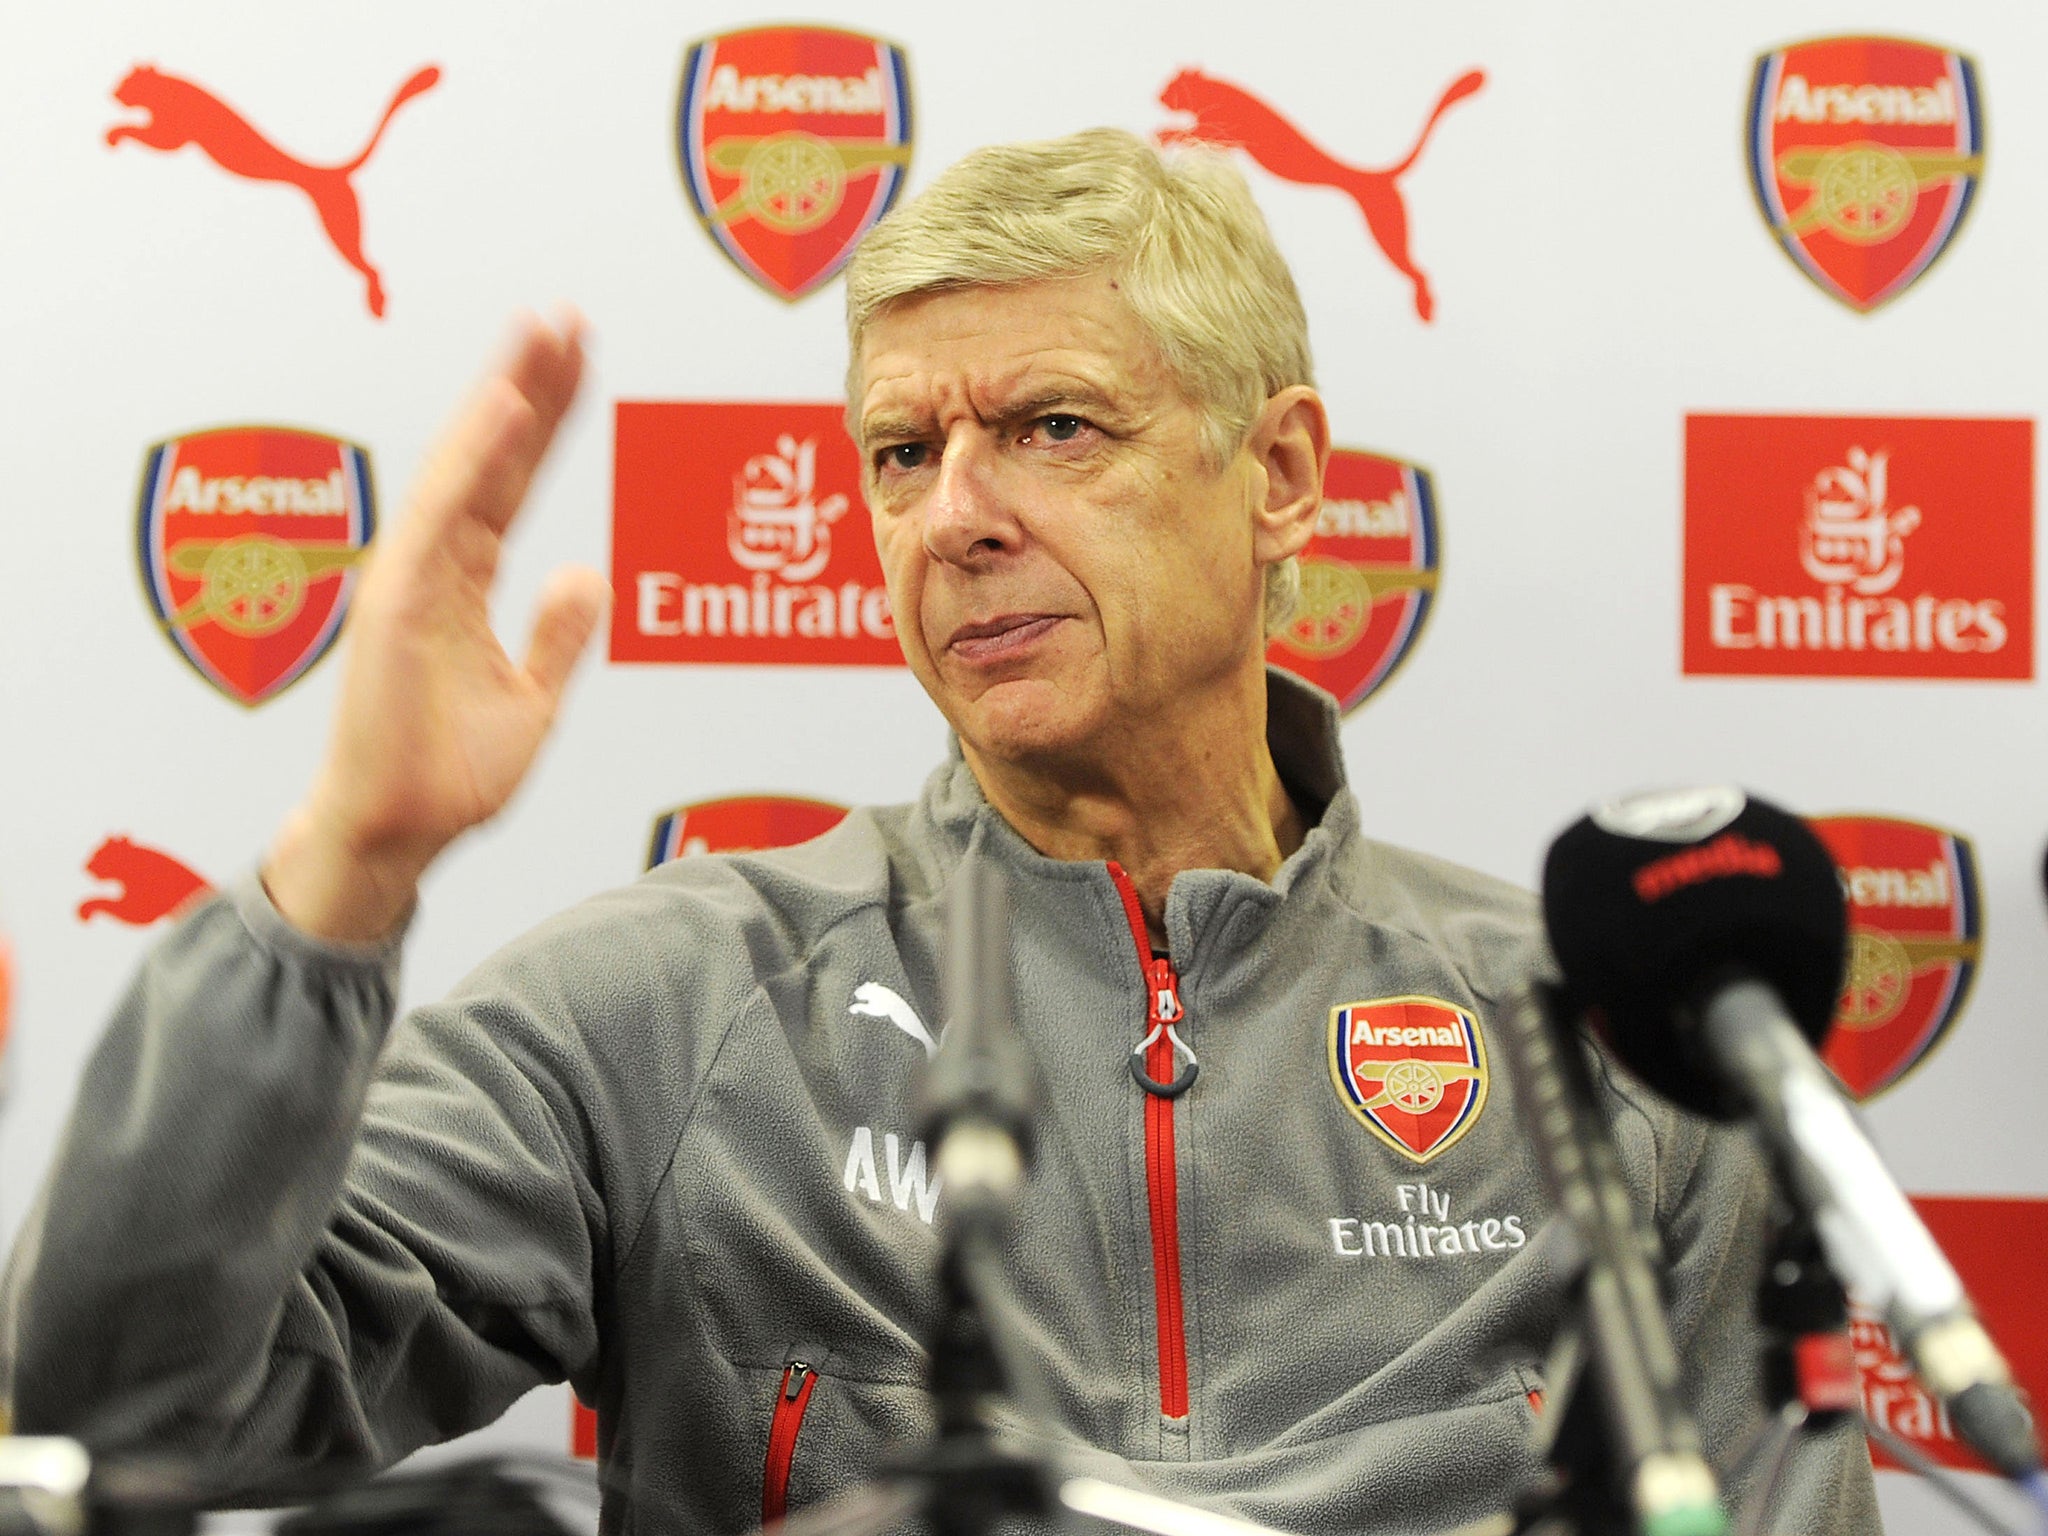 Arsene Wenger's current Arsenal deal expires at the end of the season